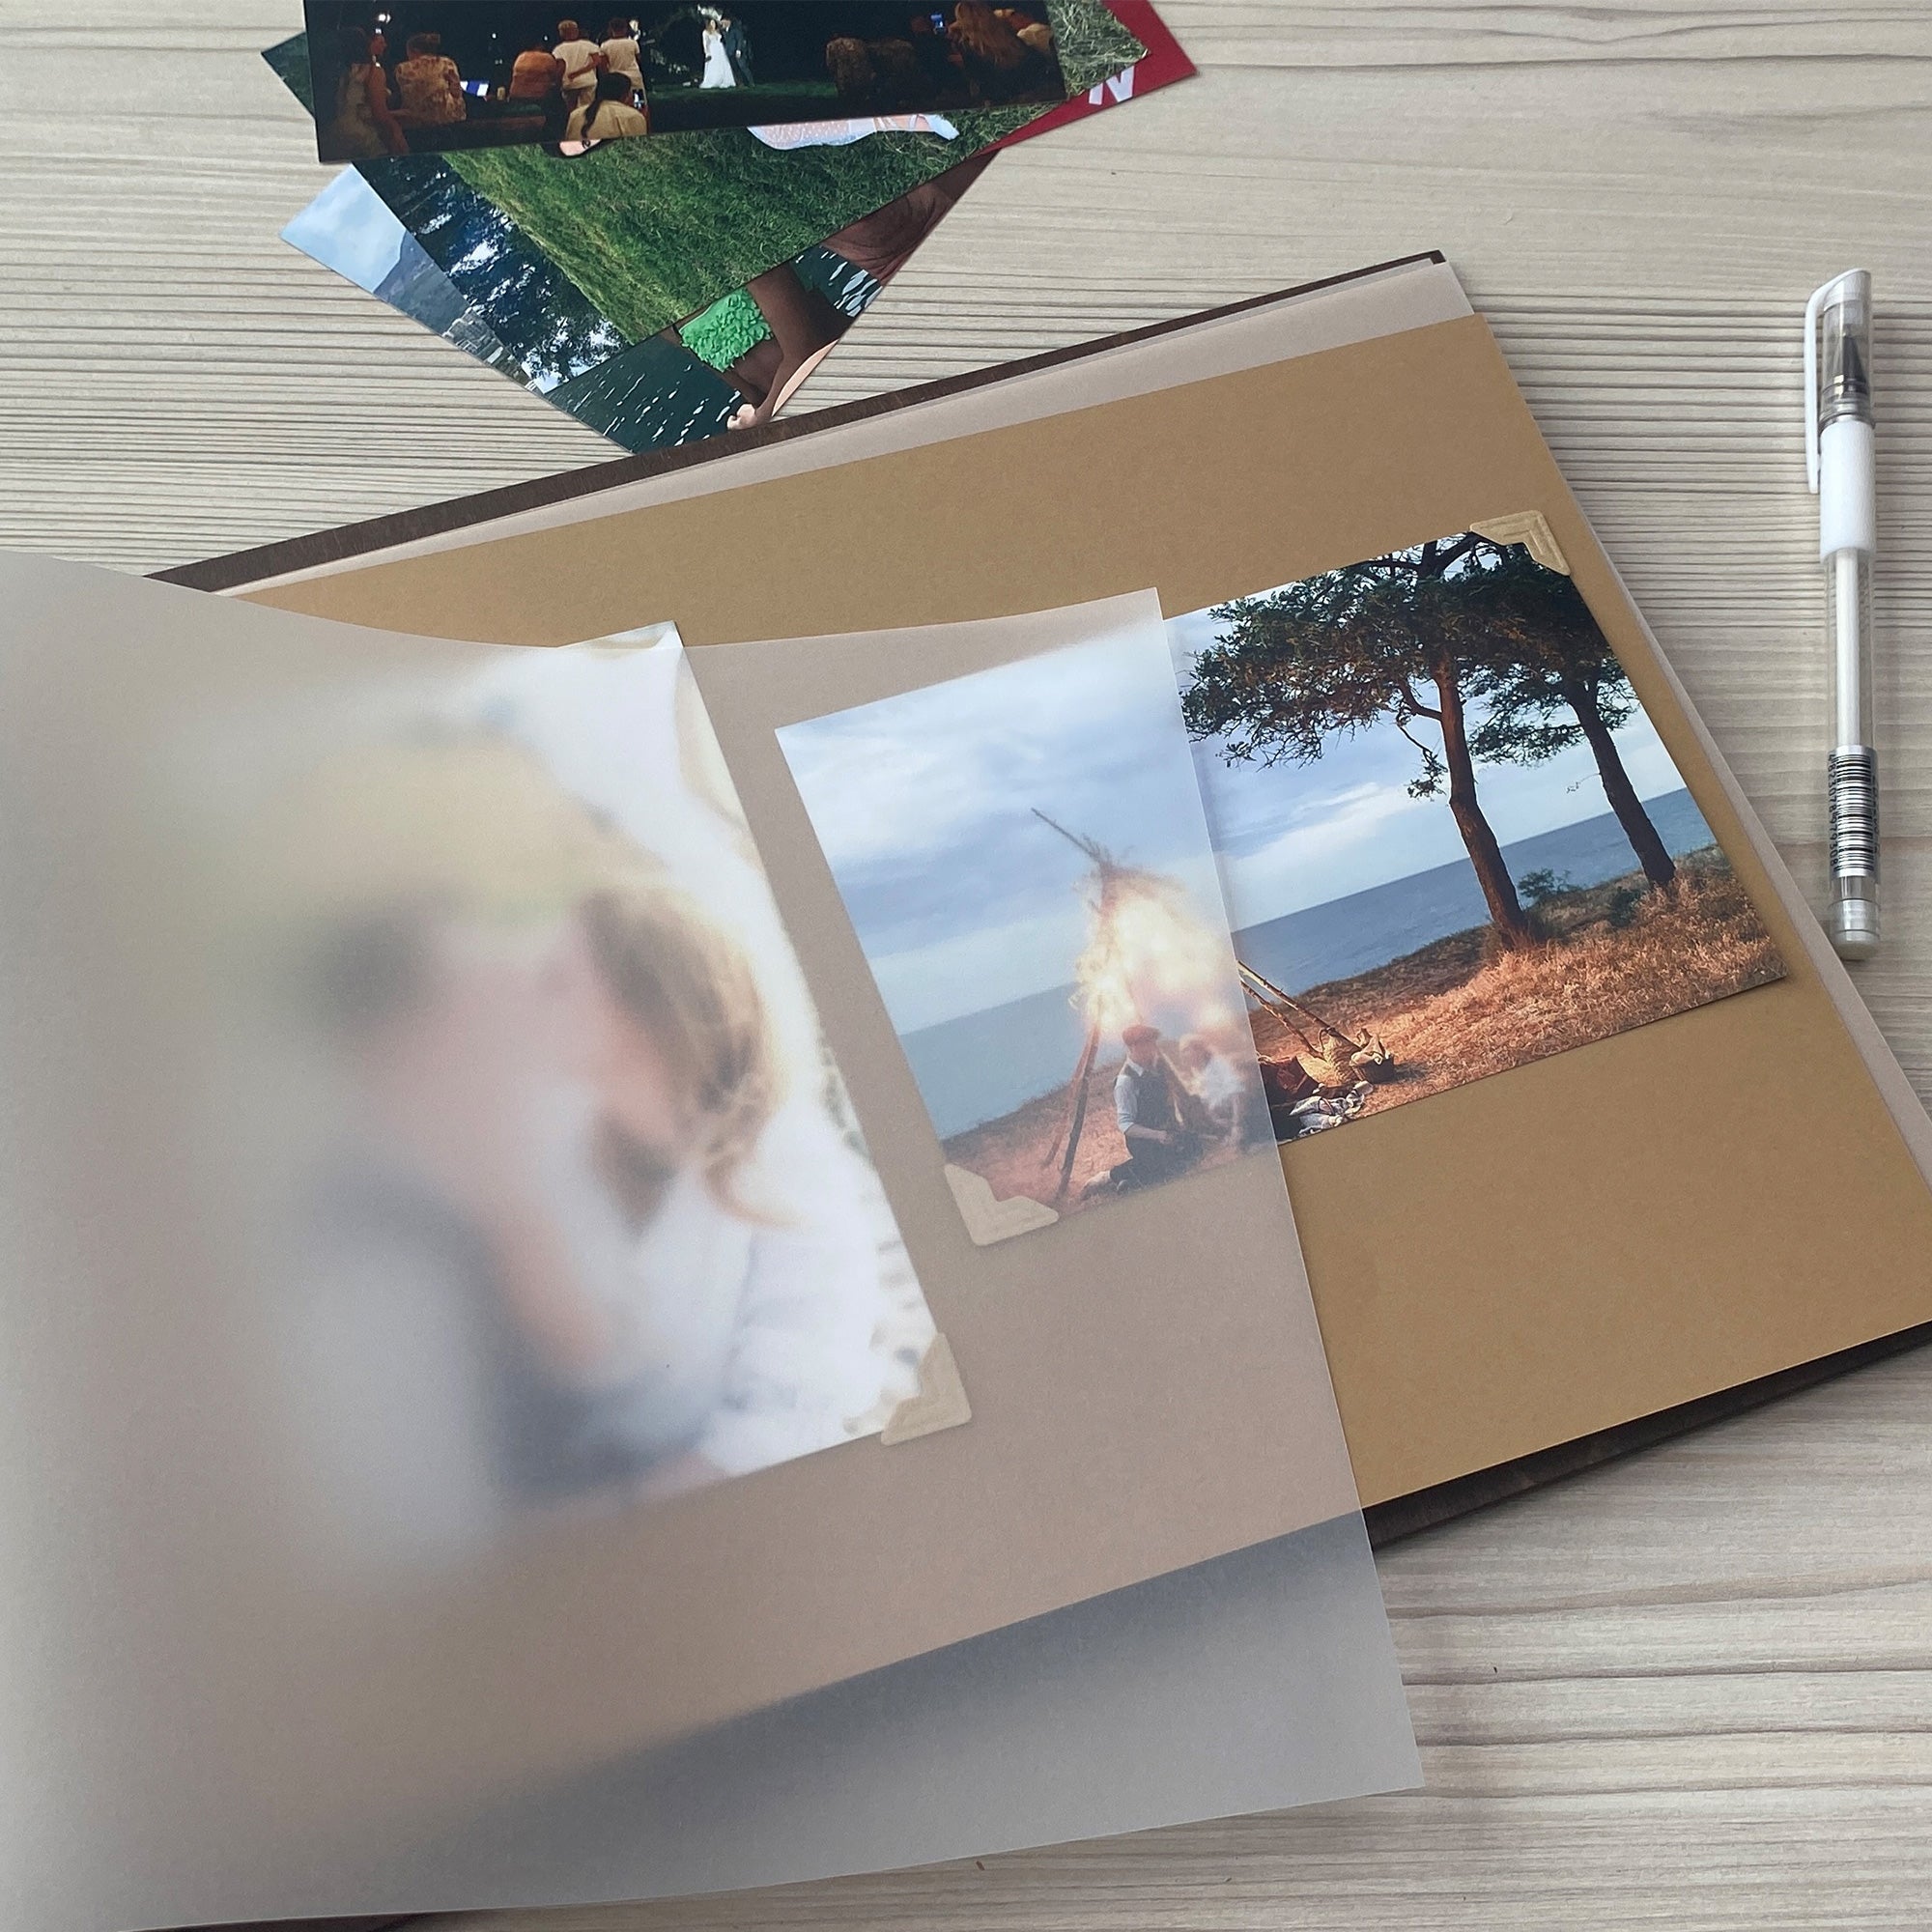 Personalized photo album cover and Map_mountain engraving